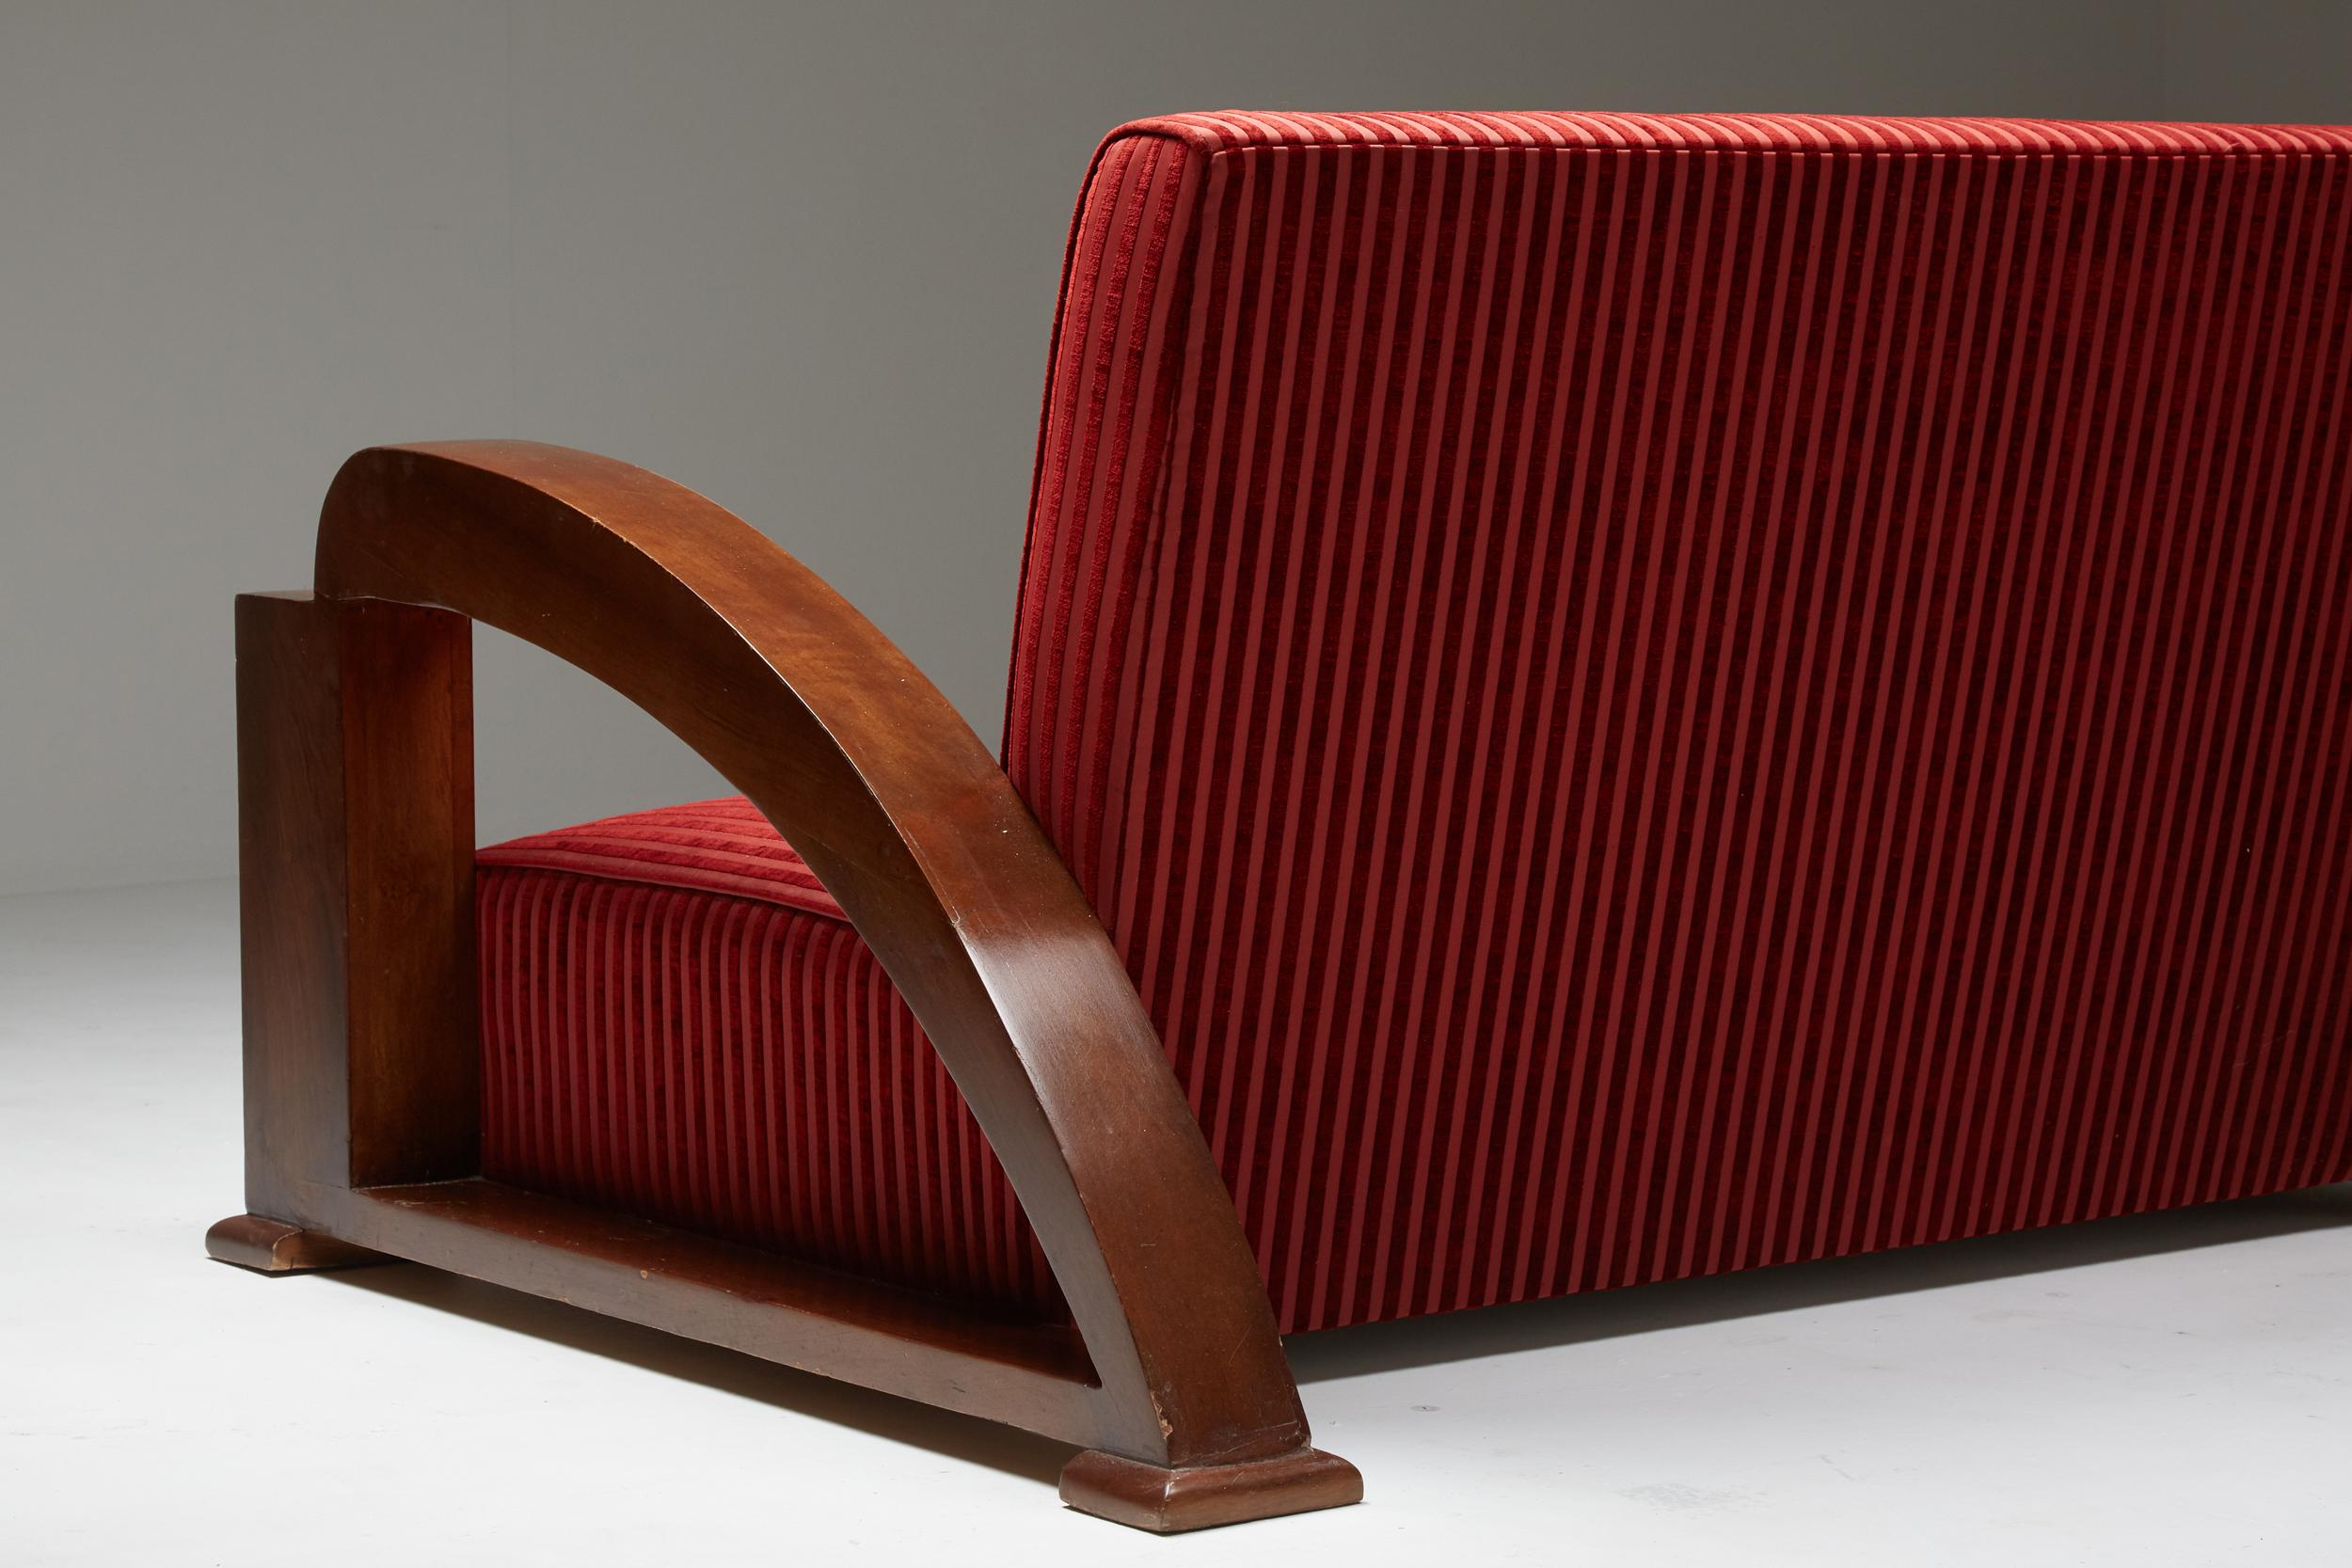 Fruitwood French Art Deco Sofa in Red Striped Velvet and with Swoosh Armrests